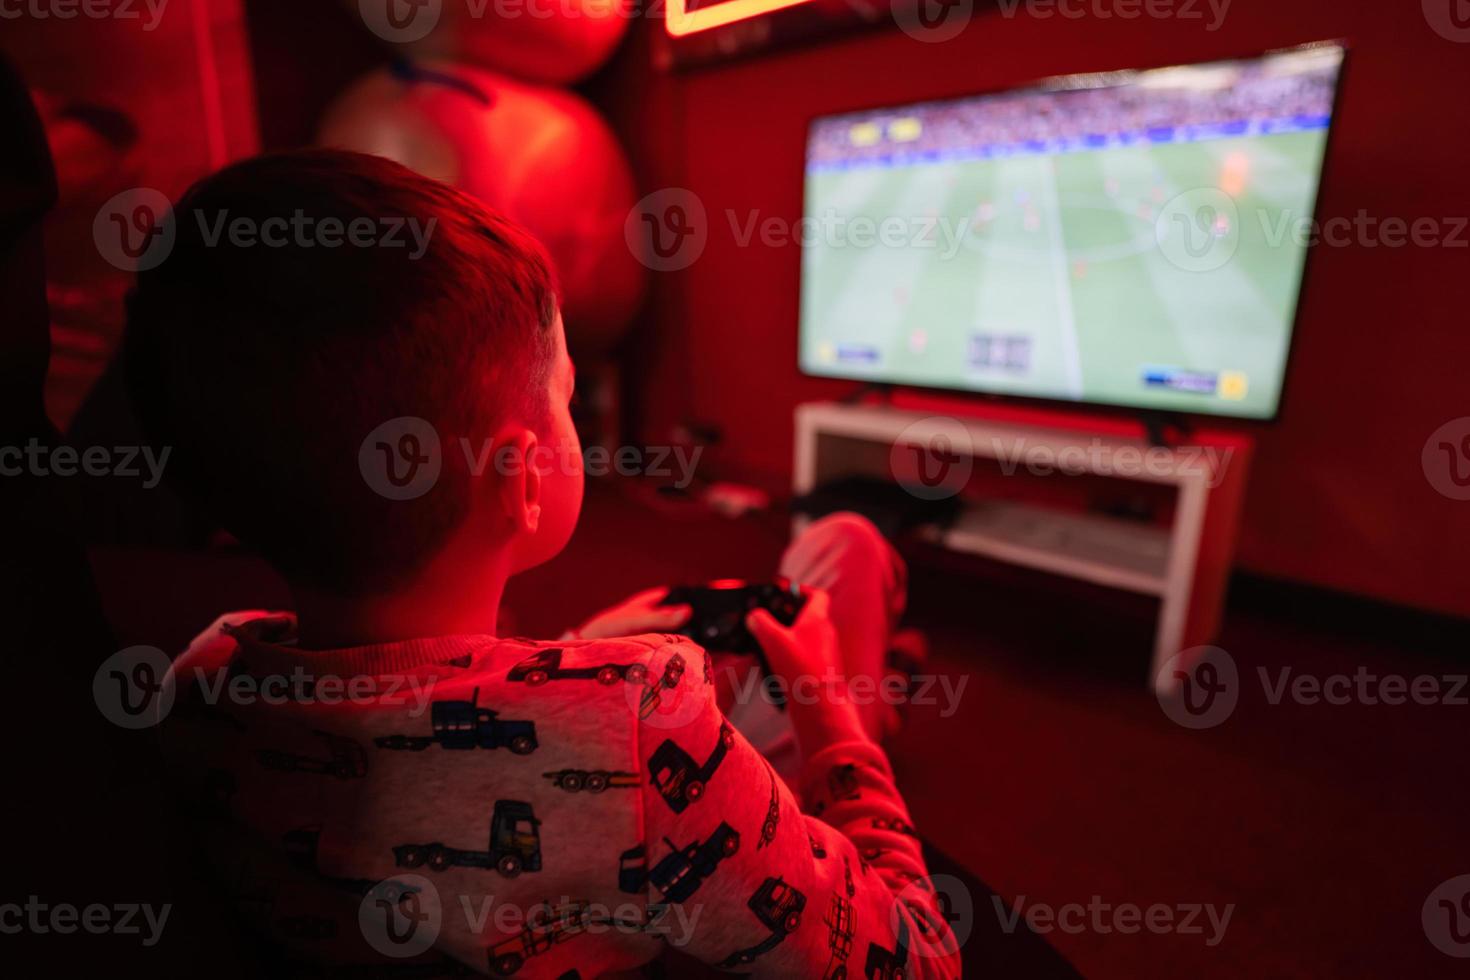 Boy gamer play gamepad football video game console in red gaming room. photo